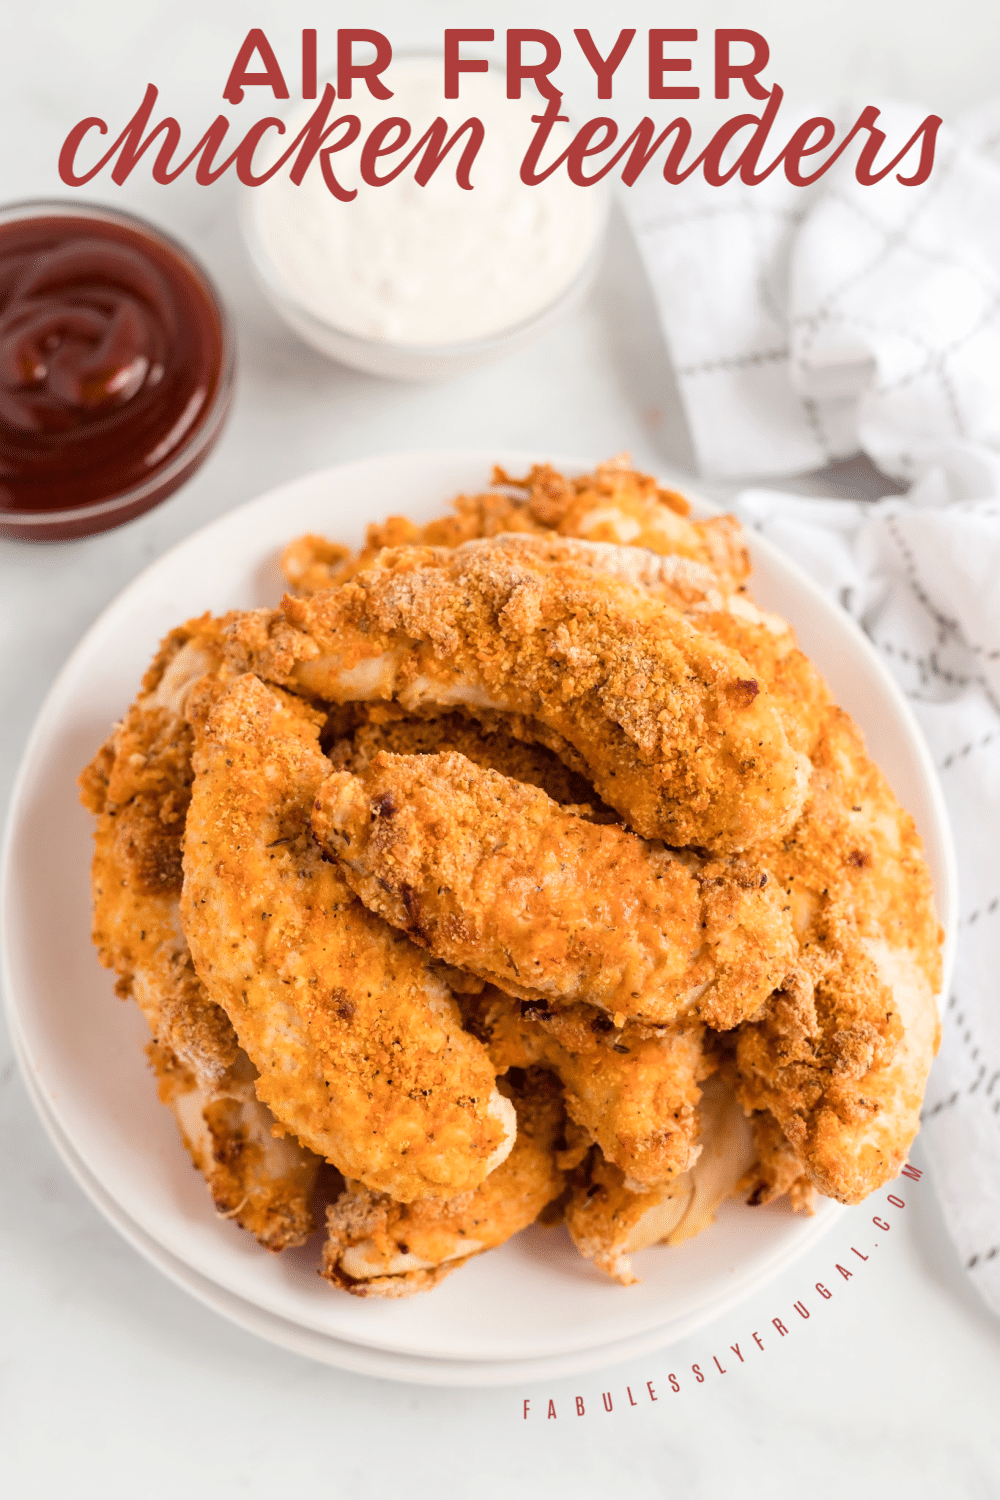 Air fried chicken tenders next to dipping sauce